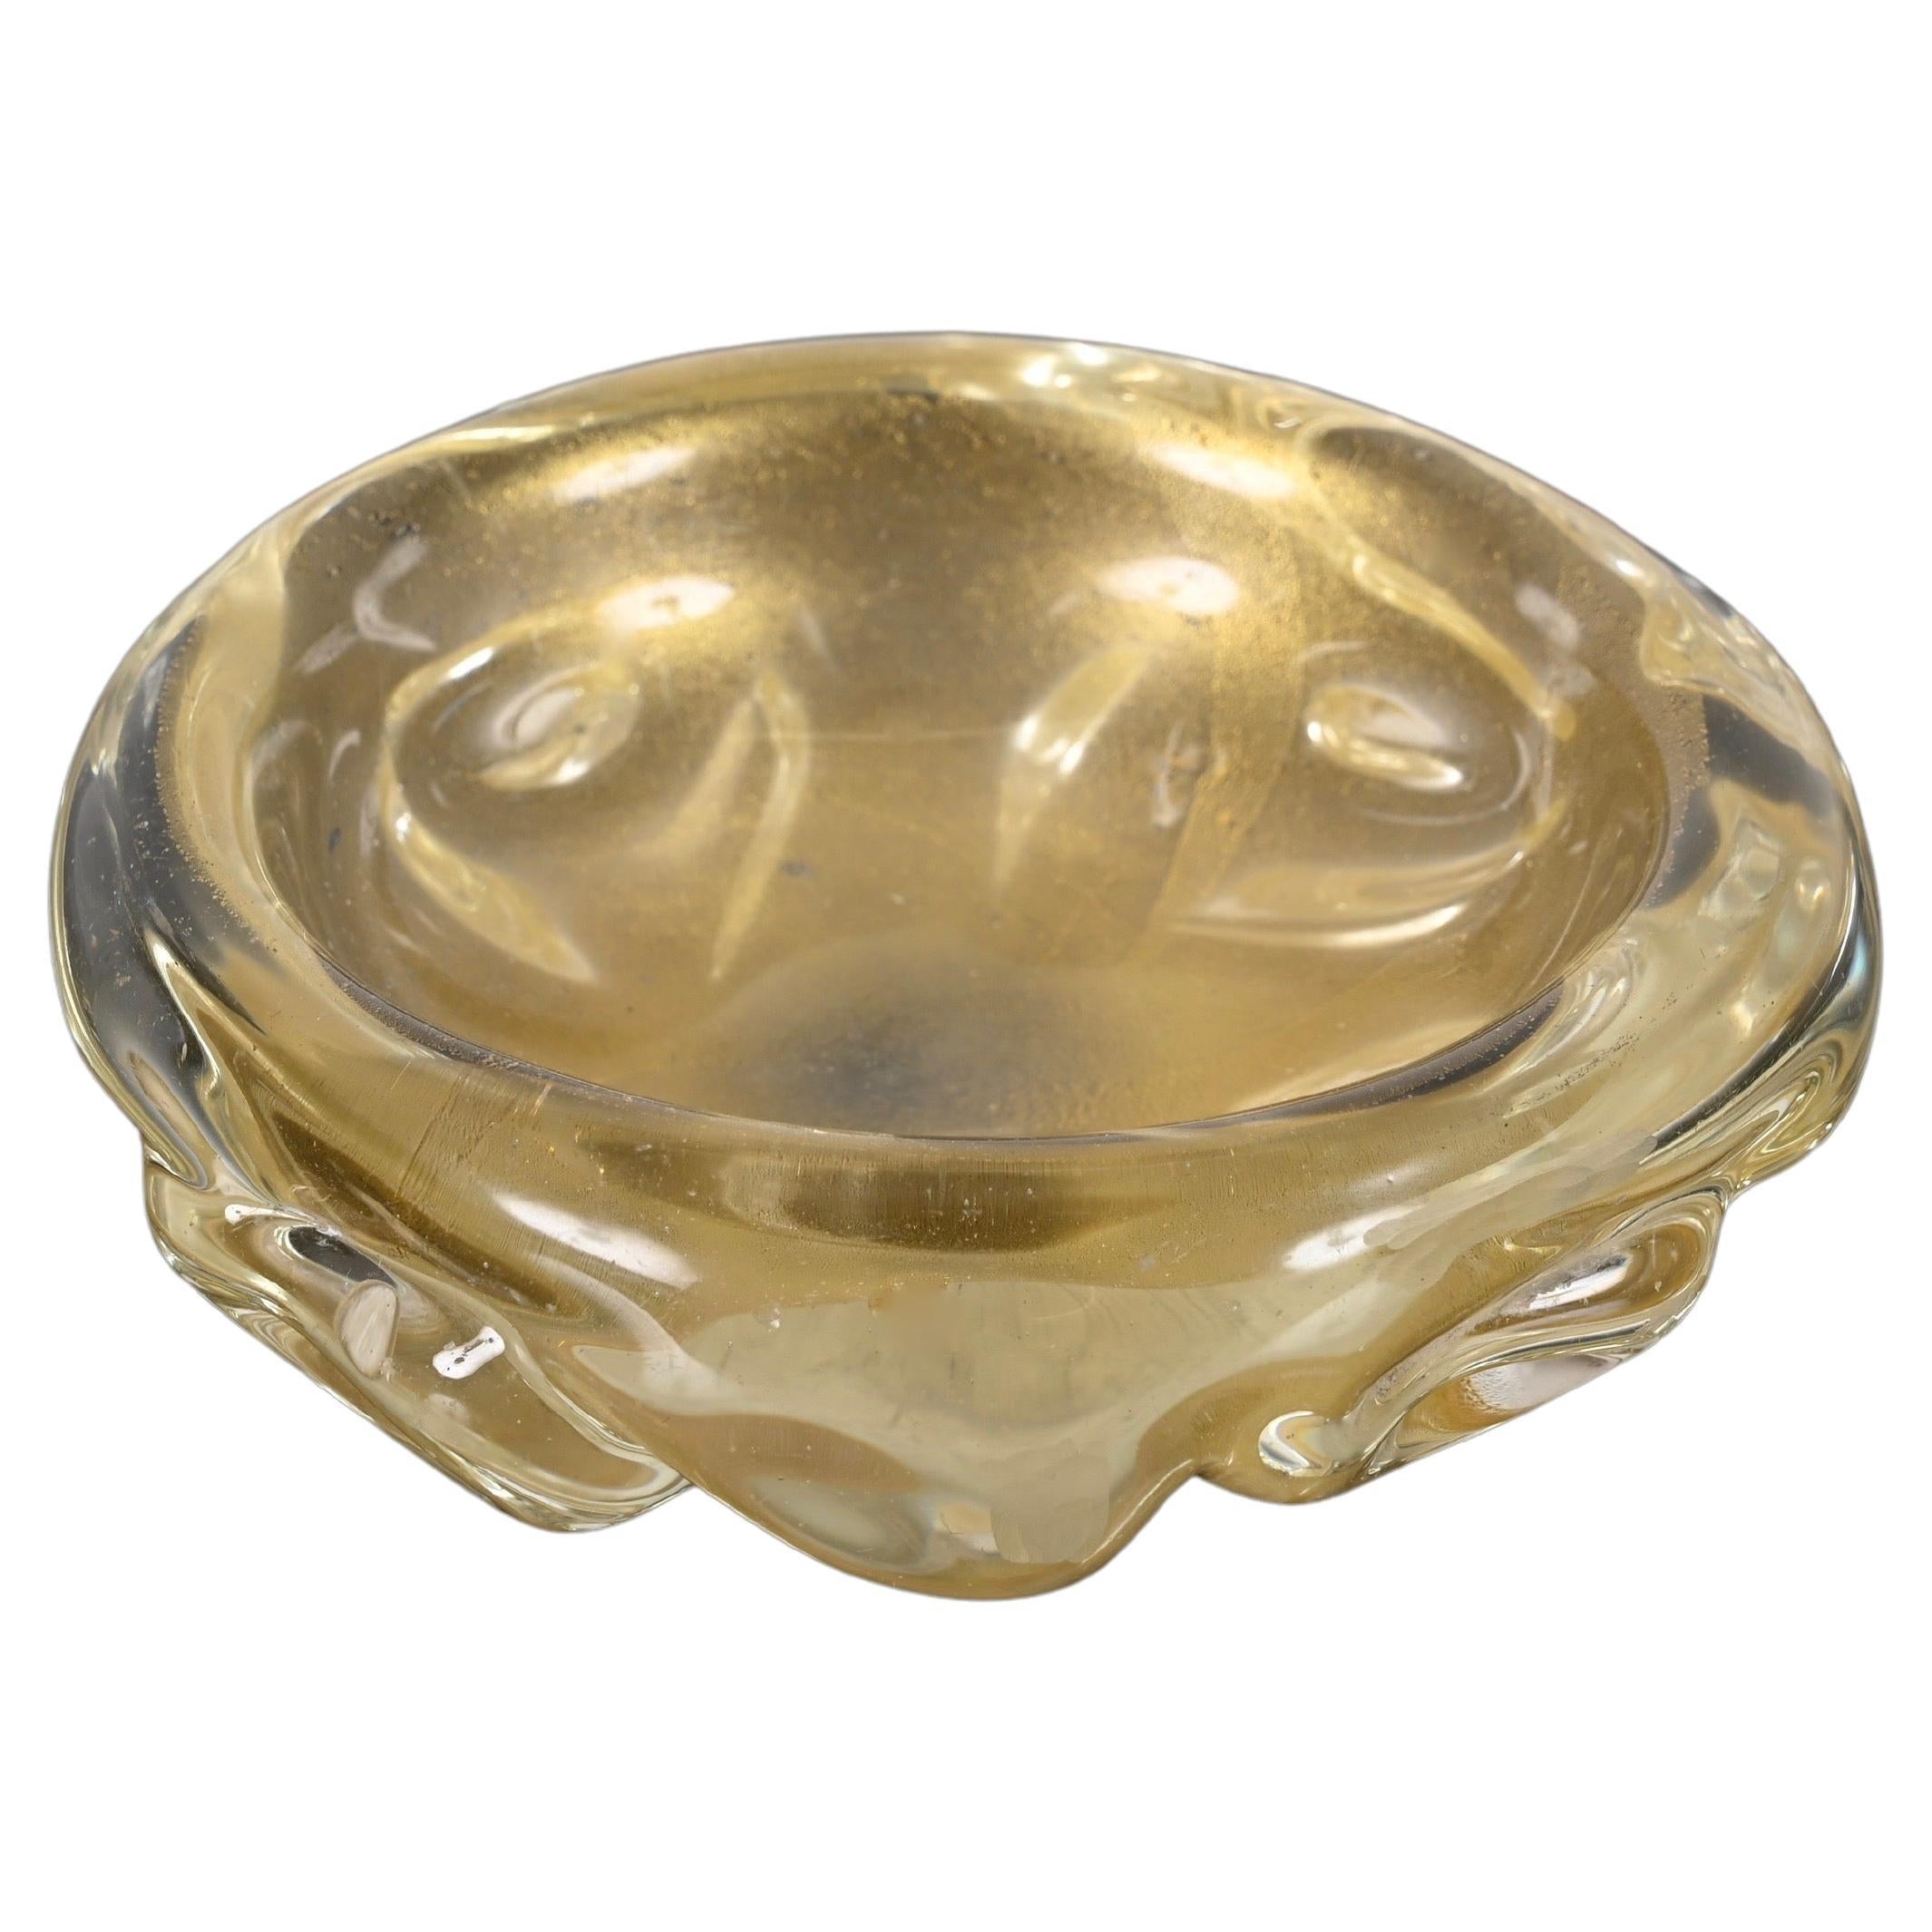 Archimede Seguso Midcentury Murano Glass Bowl with Gold Dots, Italy, 1960s For Sale